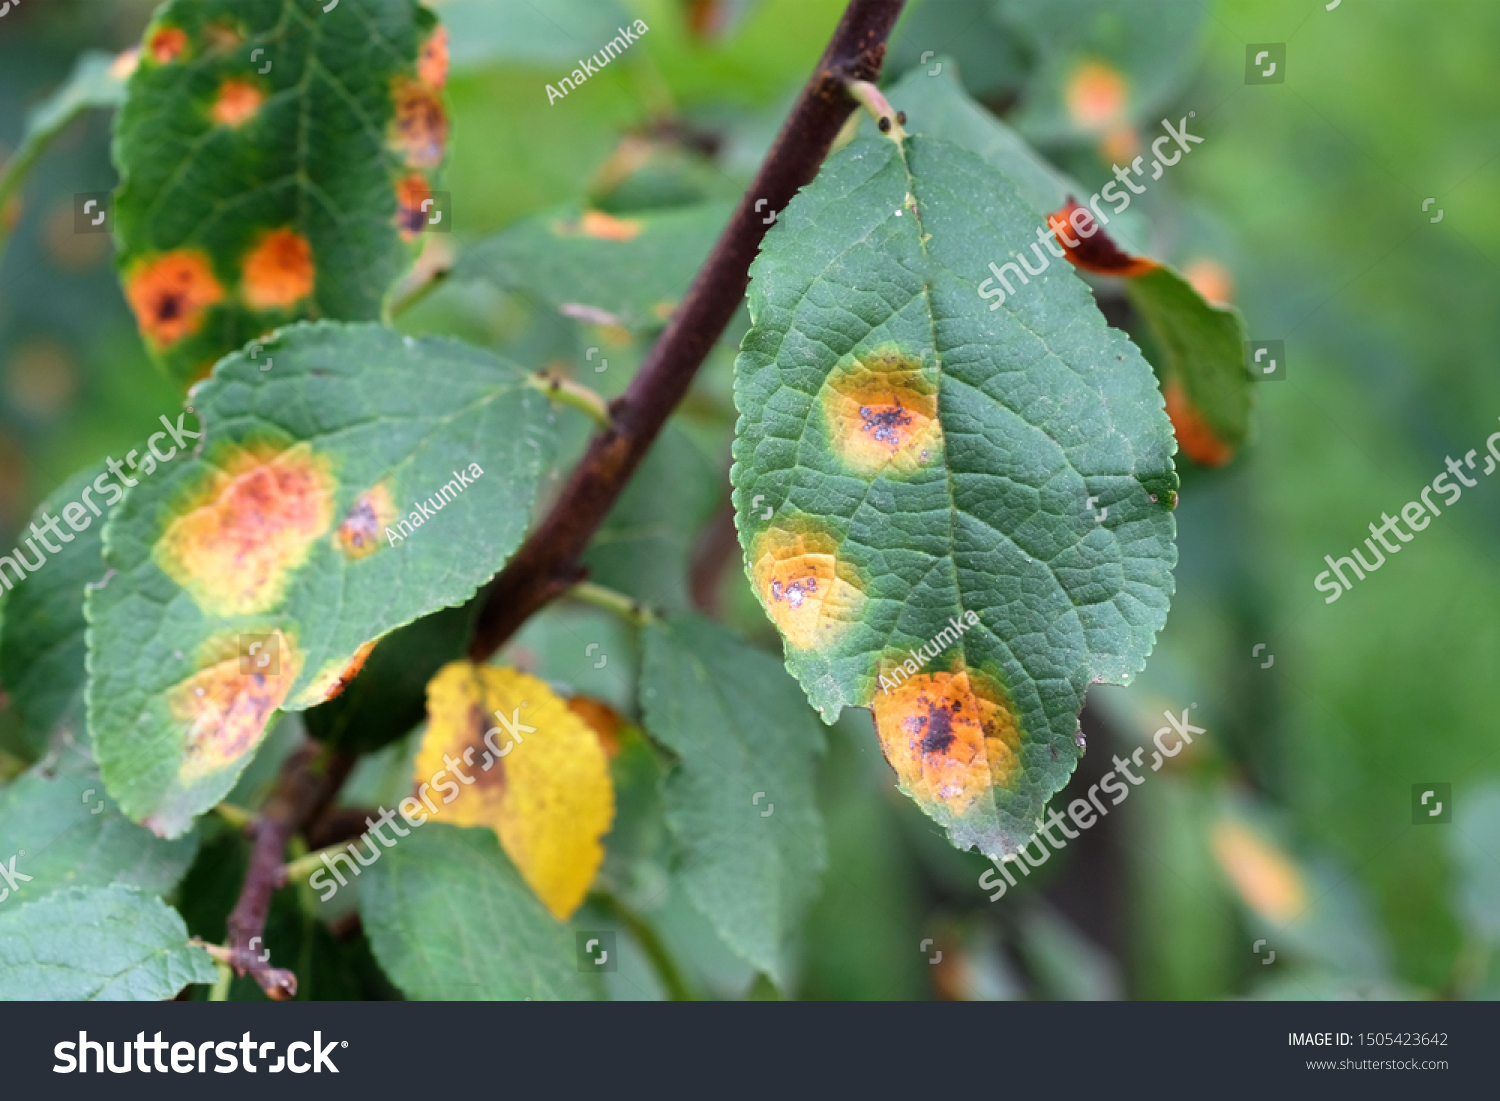 Apple tree branch with green leaves affected by a fungal disease rust. A branch of a rusted apple tree. Pest control and protection of gardens from diseases. #1505423642